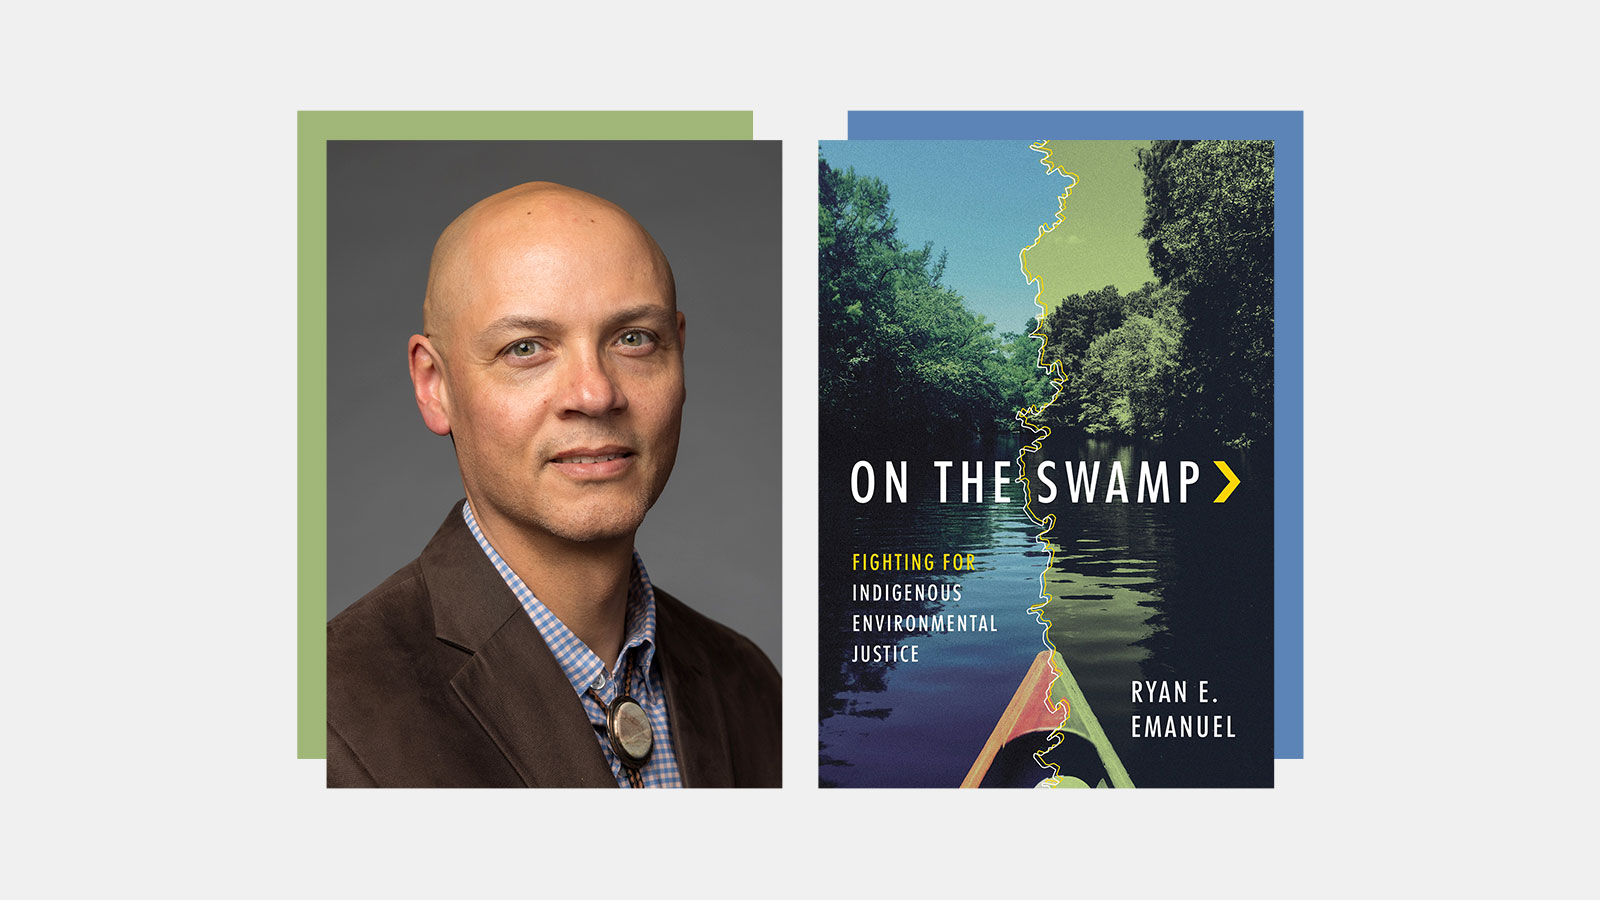 Side-by-side images of the book cover for On the Swamp and the author, Ryan E. Emanuel